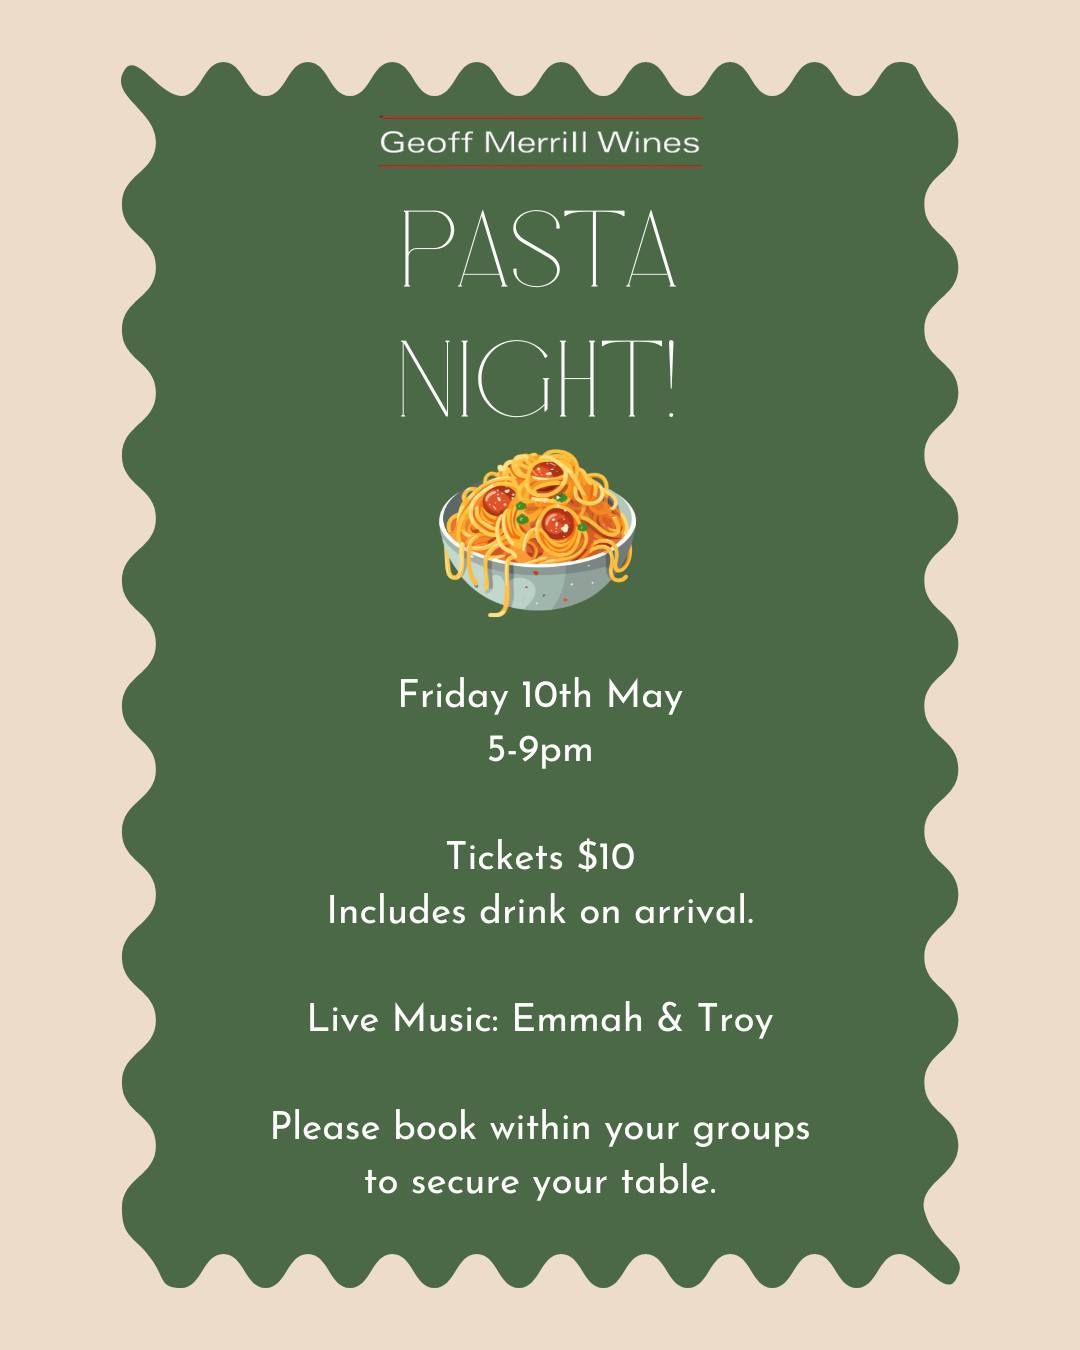 SOLD OUT!! Pasta Night at Geoff Merrill Wines